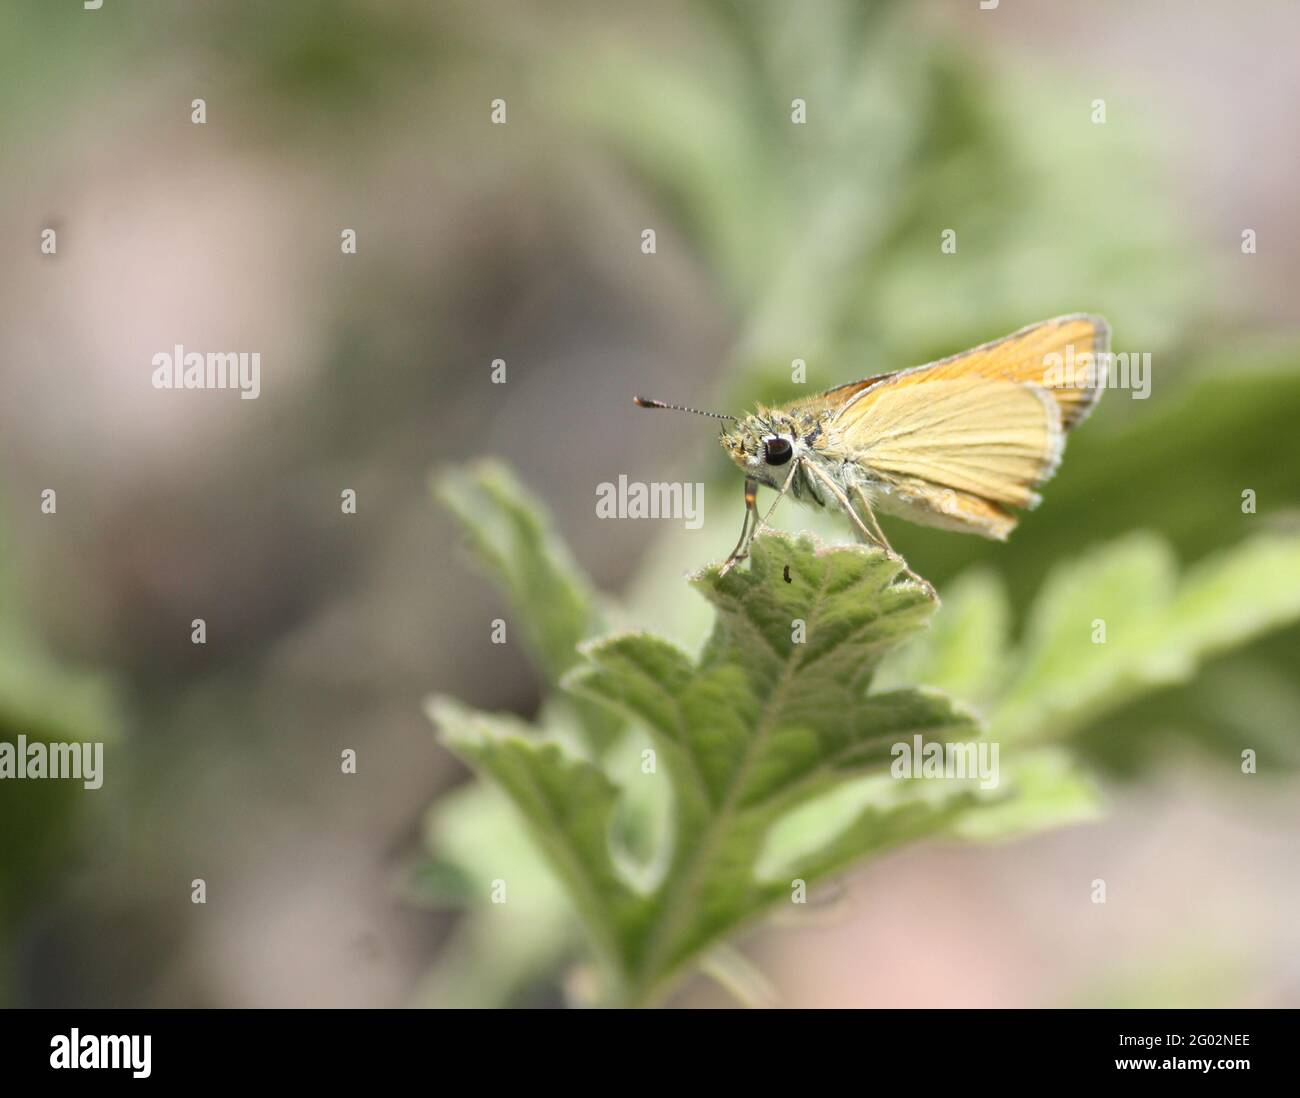 Closeup of Least Skipper butterfly with big bug eyes resting on green leaf Stock Photo